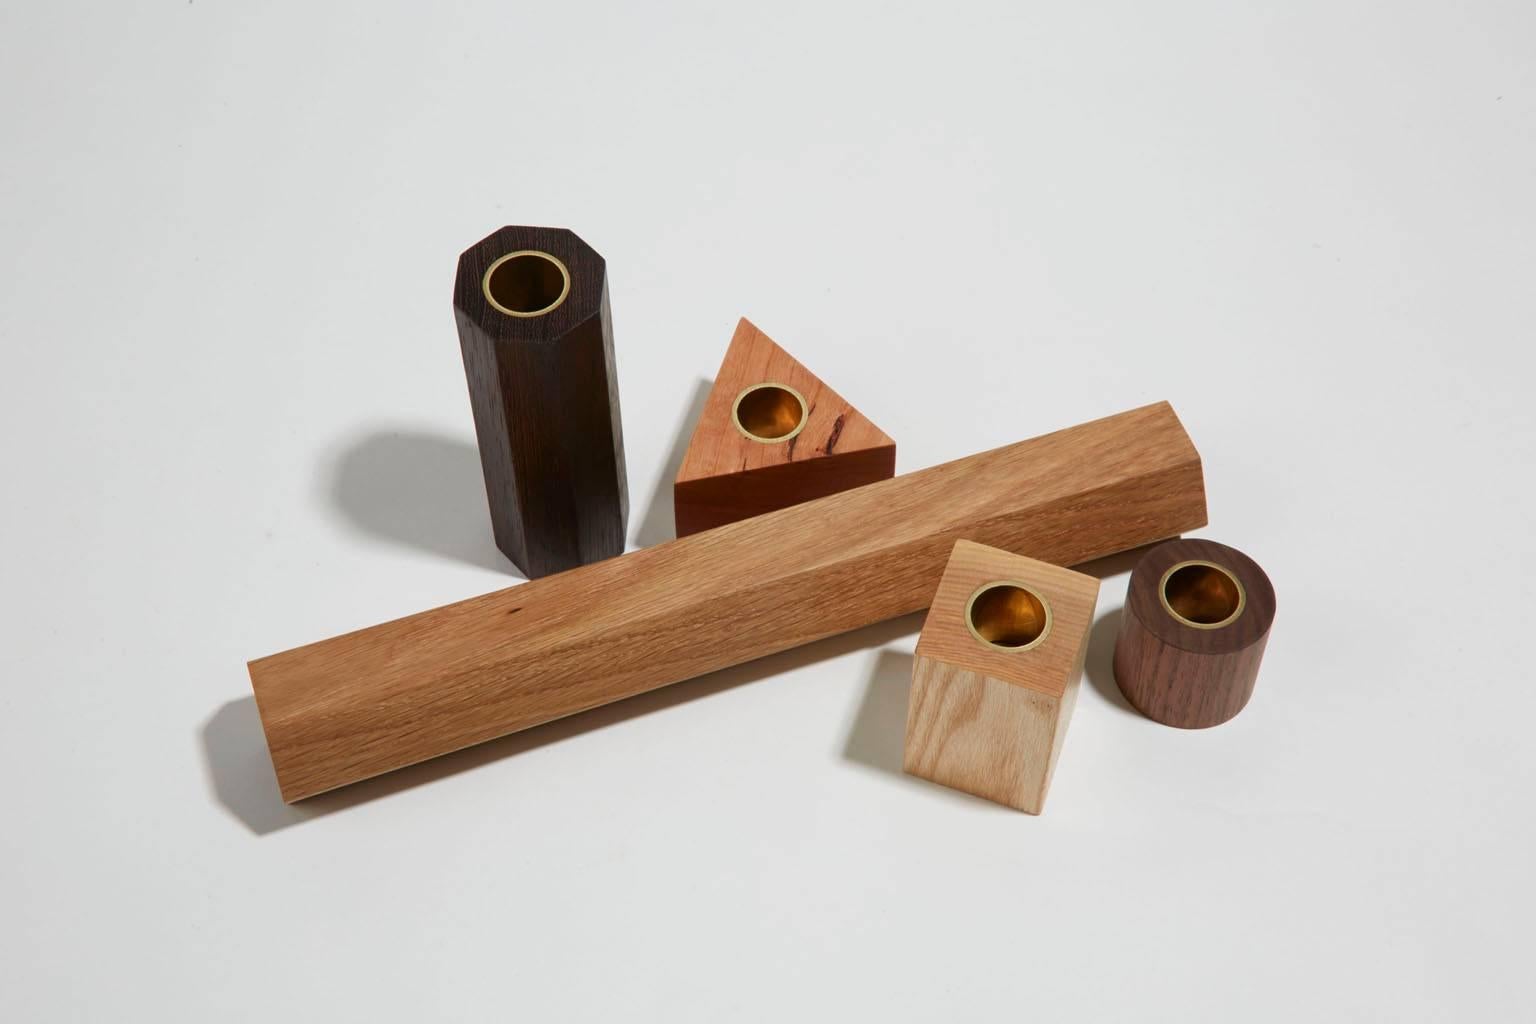 Candlestick City is a project inspired by early 20th century toy design. Noah Spencer's candlestick sets playfully explore geometry and varieties of wood species. Like building blocks, each piece in the architectural set can be arranged in multiple